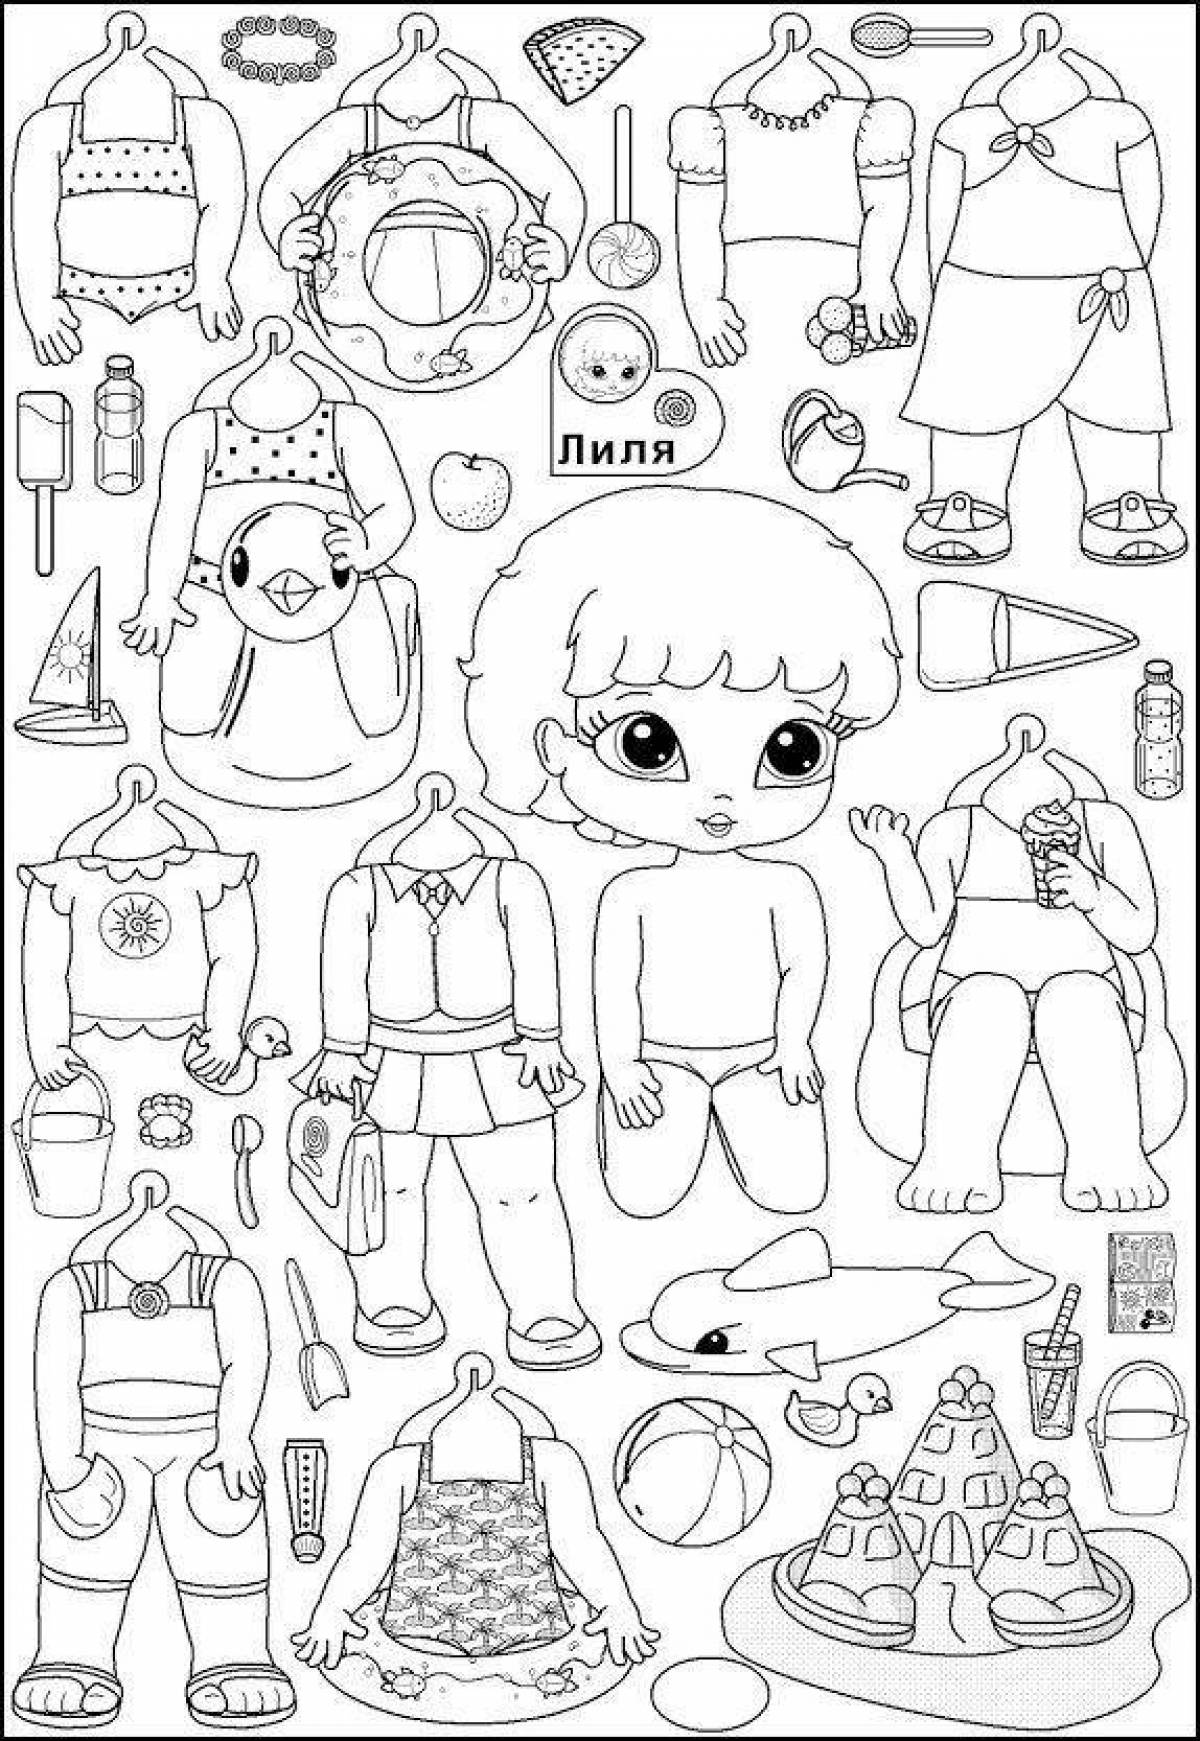 Cute cut out clothes lol doll coloring book